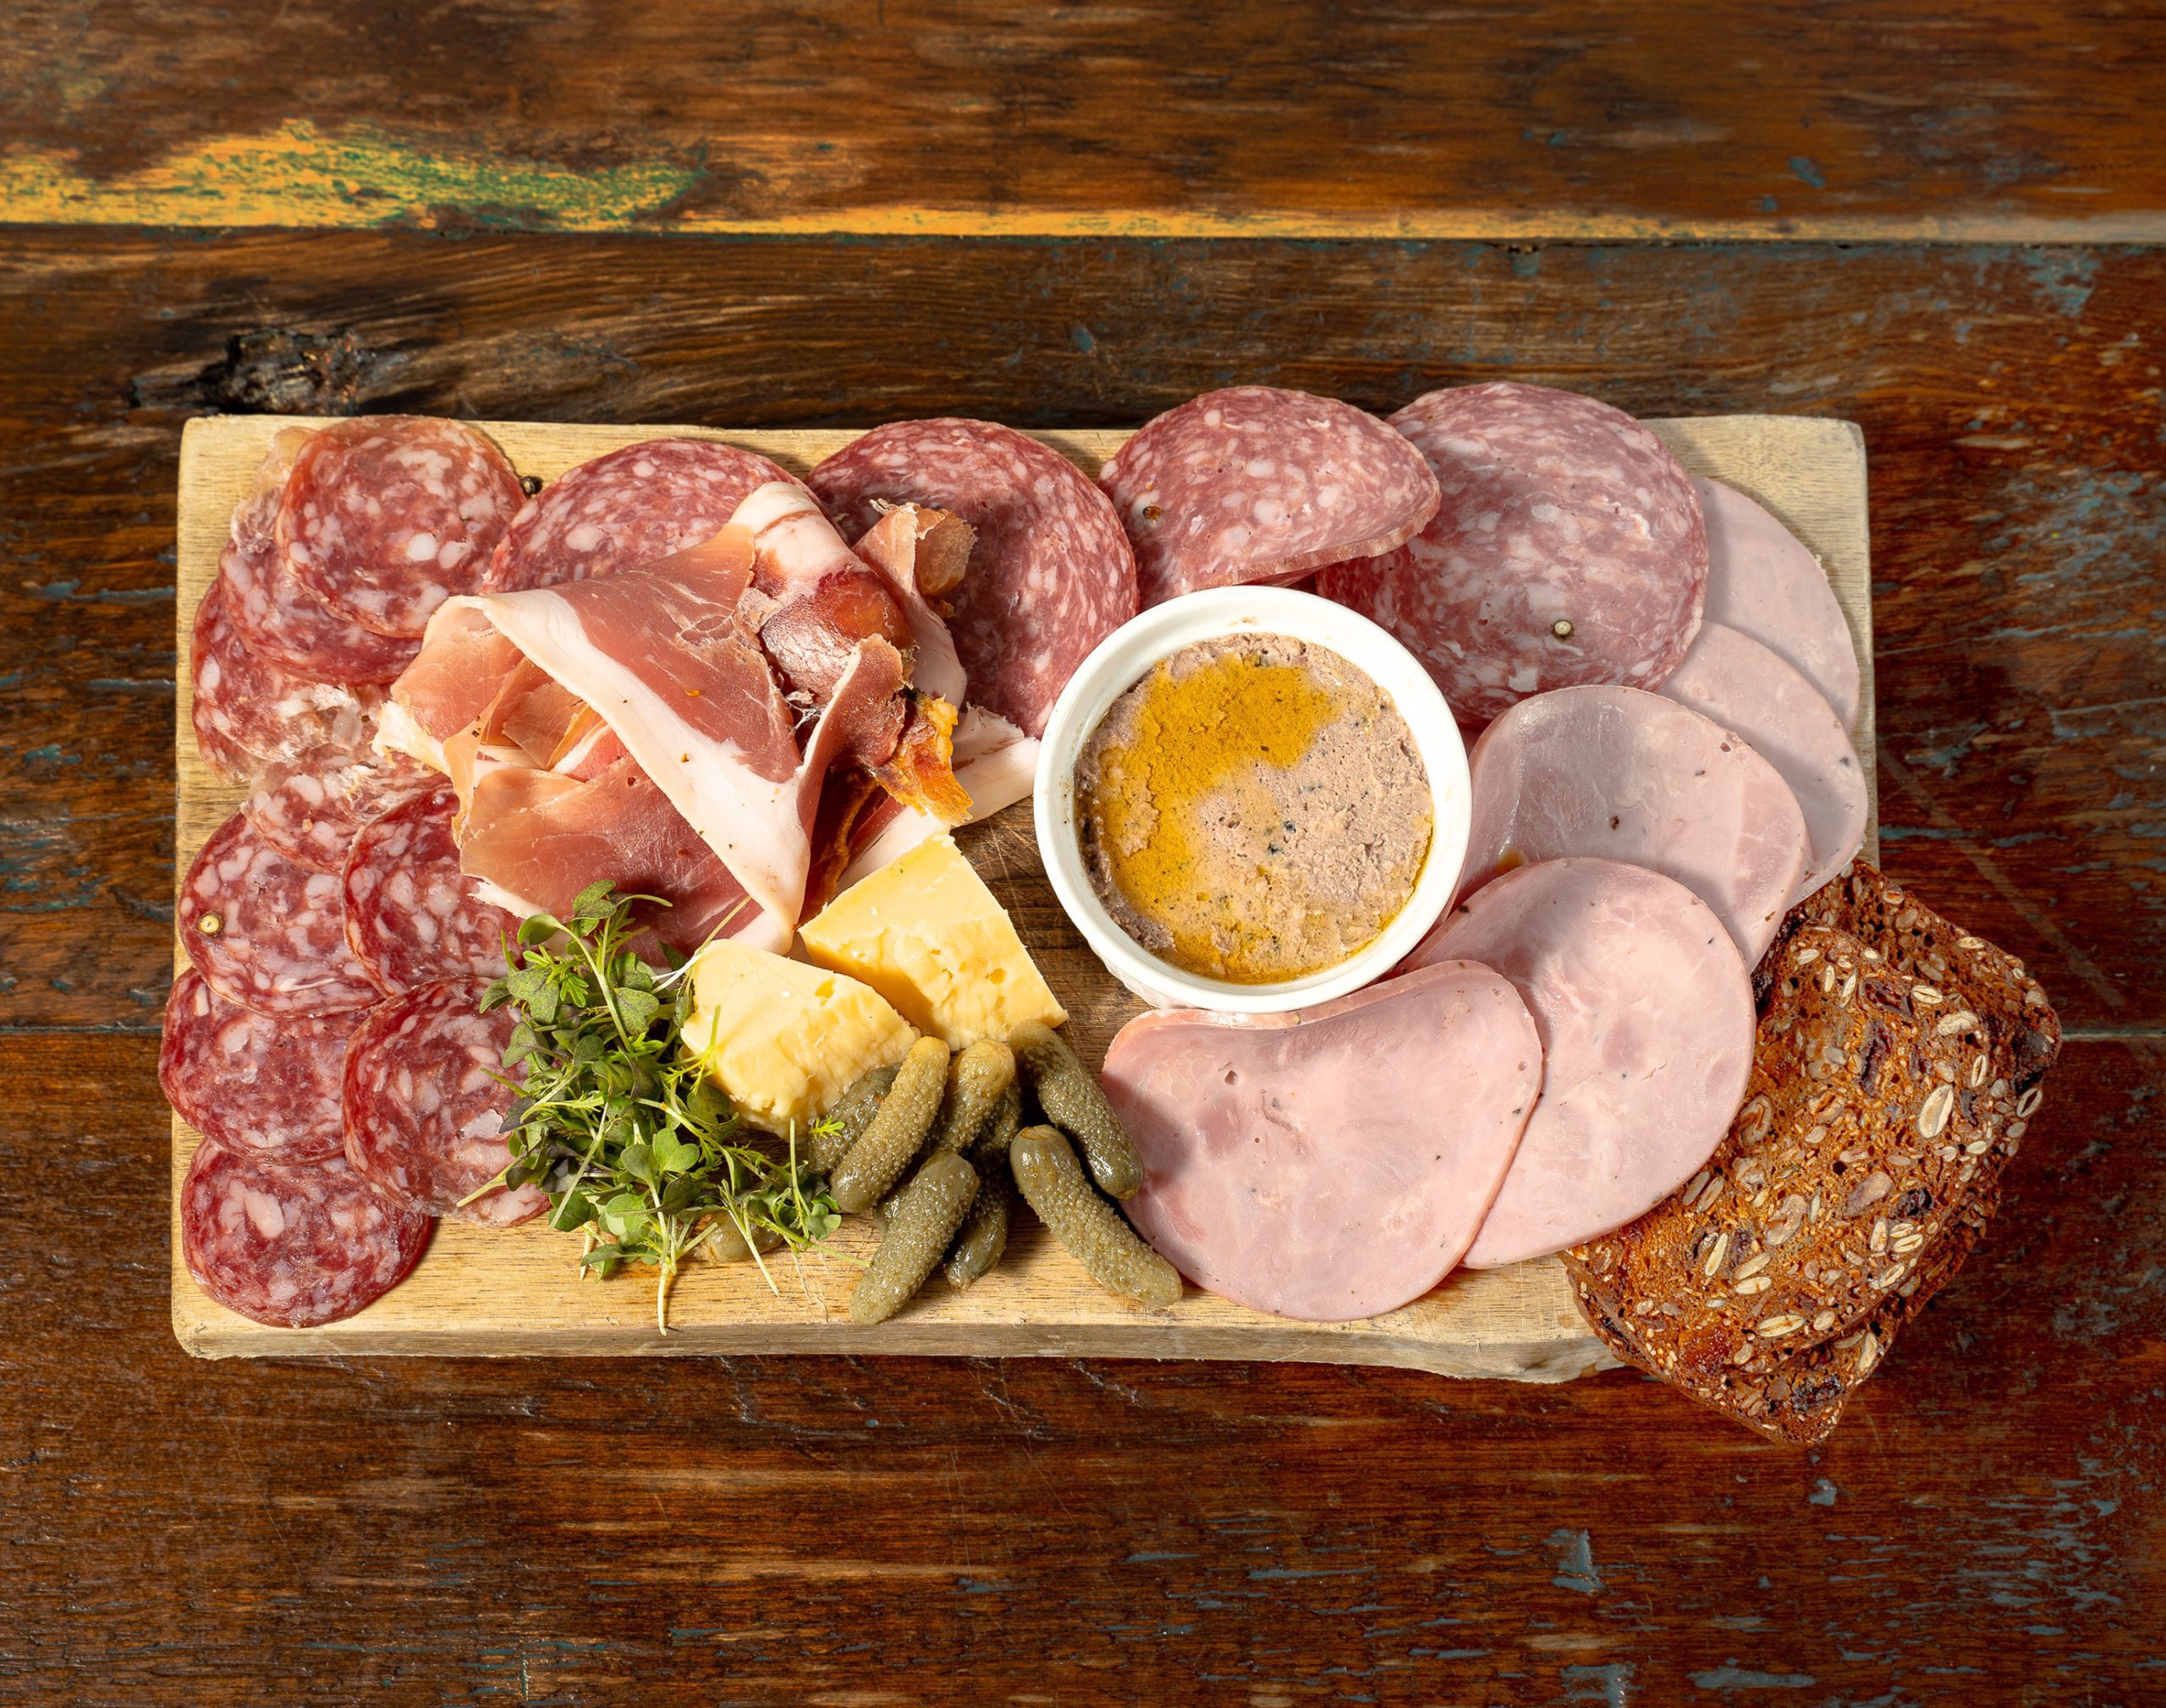 A selection of meats, cheeses, and preserves on a wooden board